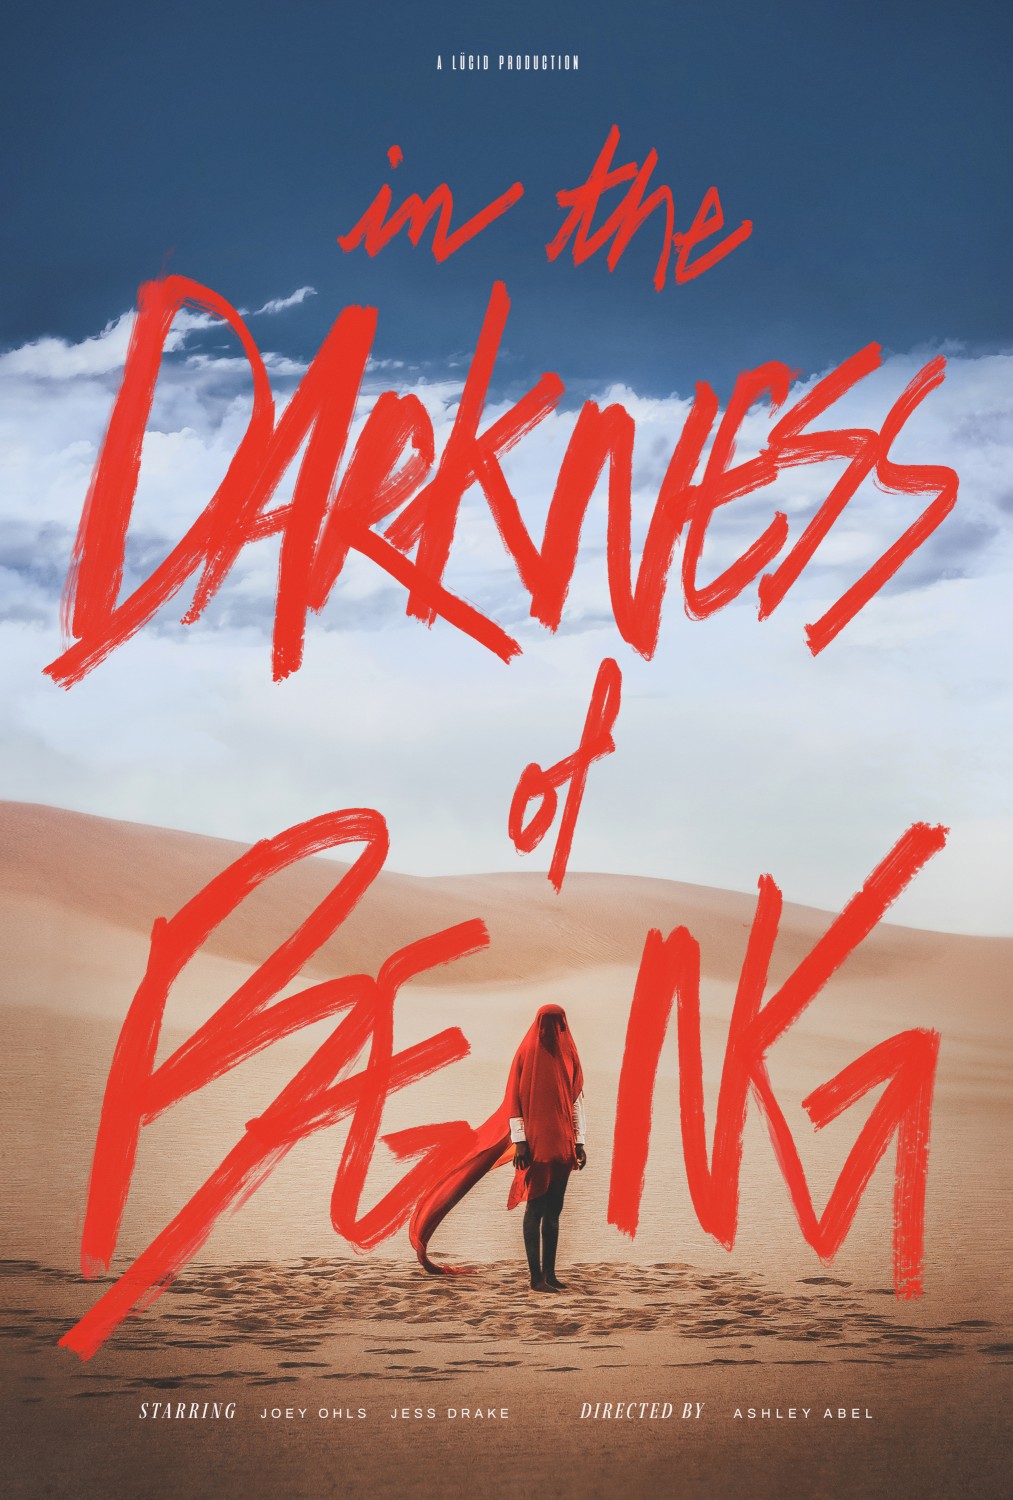 Extra Large Movie Poster Image for In the Darkness of Being